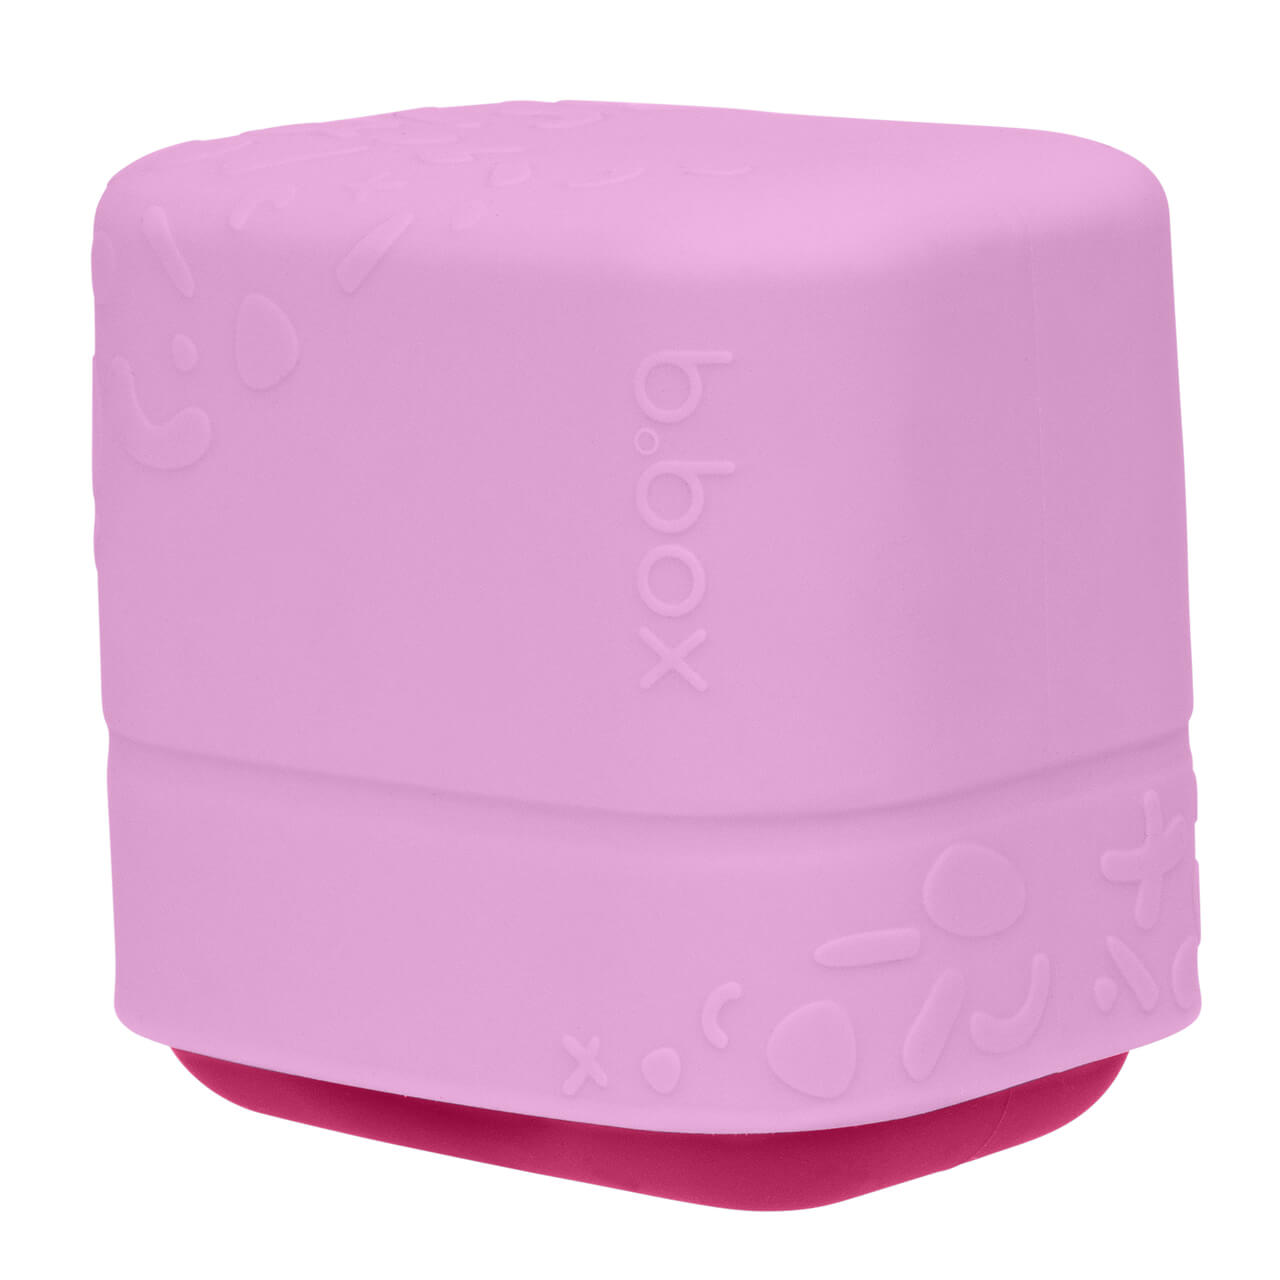 B.box Silicone Snack Cup in Berry available at Bear & Moo